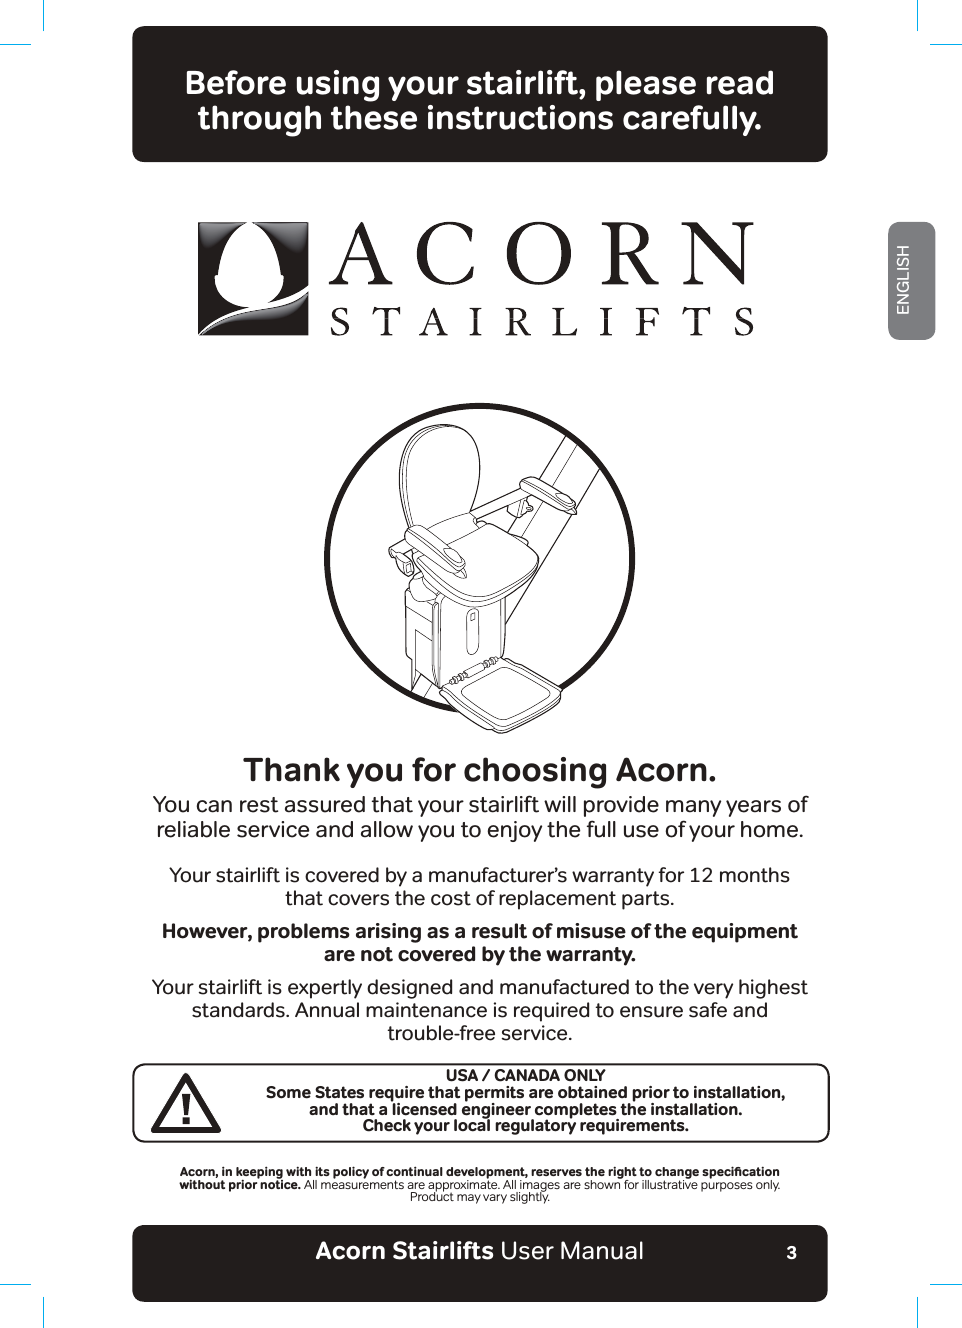 Acorn Stairlifts User ManualENGLISH3Before using your stairlift, please readthrough these instructions carefully.Thank you for choosing Acorn.You can rest assured that your stairlift will provide many years ofreliable service and allow you to enjoy the full use of your home.Your stairlift is covered by a manufacturer’s warranty for 12 monthsthat covers the cost of replacement parts.However, problems arising as a result of misuse of the equipmentare not covered by the warranty.Your stairlift is expertly designed and manufactured to the very highest standards. Annual maintenance is required to ensure safe andtrouble-free service.#EQTPǊKPMGGRKPIYKVJKVURQNKE[QHEQPVKPWCNFGXGNQROGPVǊTGUGTXGUVJGTKIJVVQEJCPIGURGEKƵECVKQPwithout prior notice. All measurements are approximate. All images are shown for illustrative purposes only. Product may vary slightly.USA / CANADA ONLYSome States require that permits are obtained prior to installation, and that a licensed engineer completes the installation. Check your local regulatory requirements.